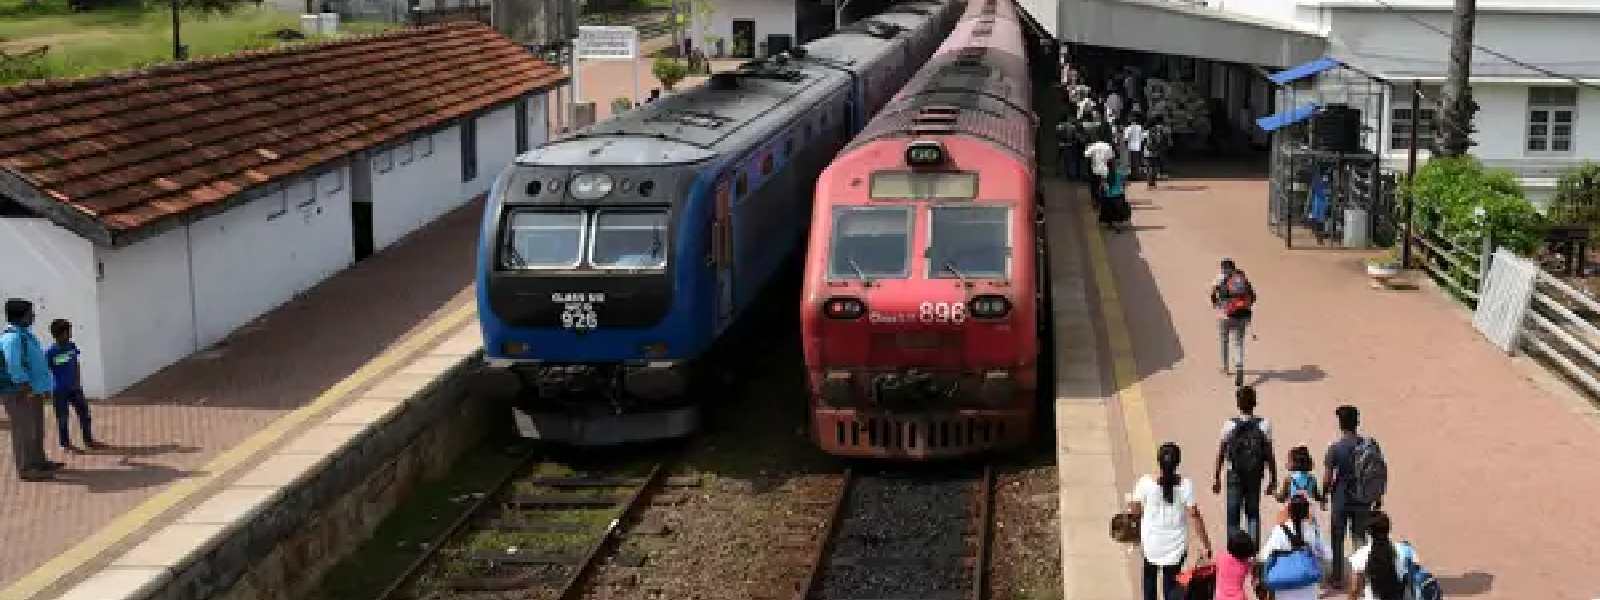 Sri Lanka: Train delays expected as workers go on strike